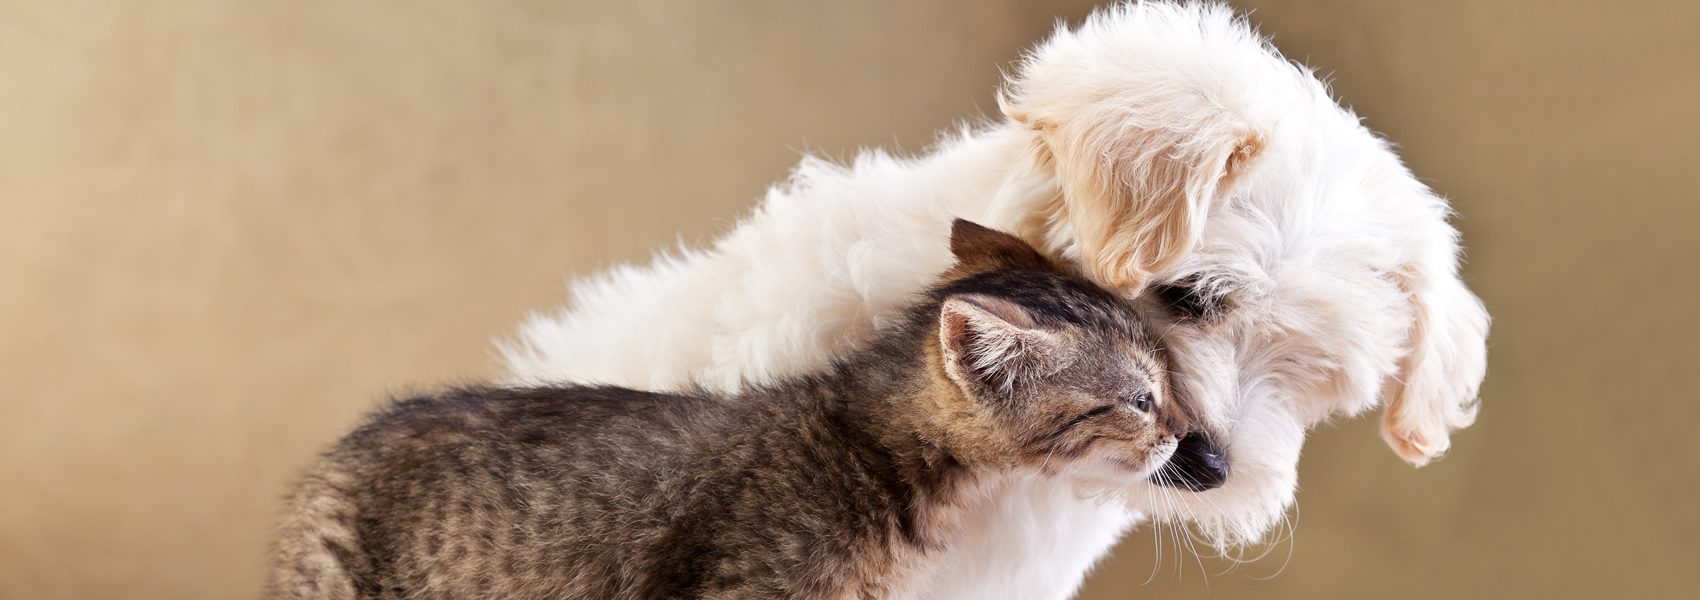 Affectionate Dog and Cat